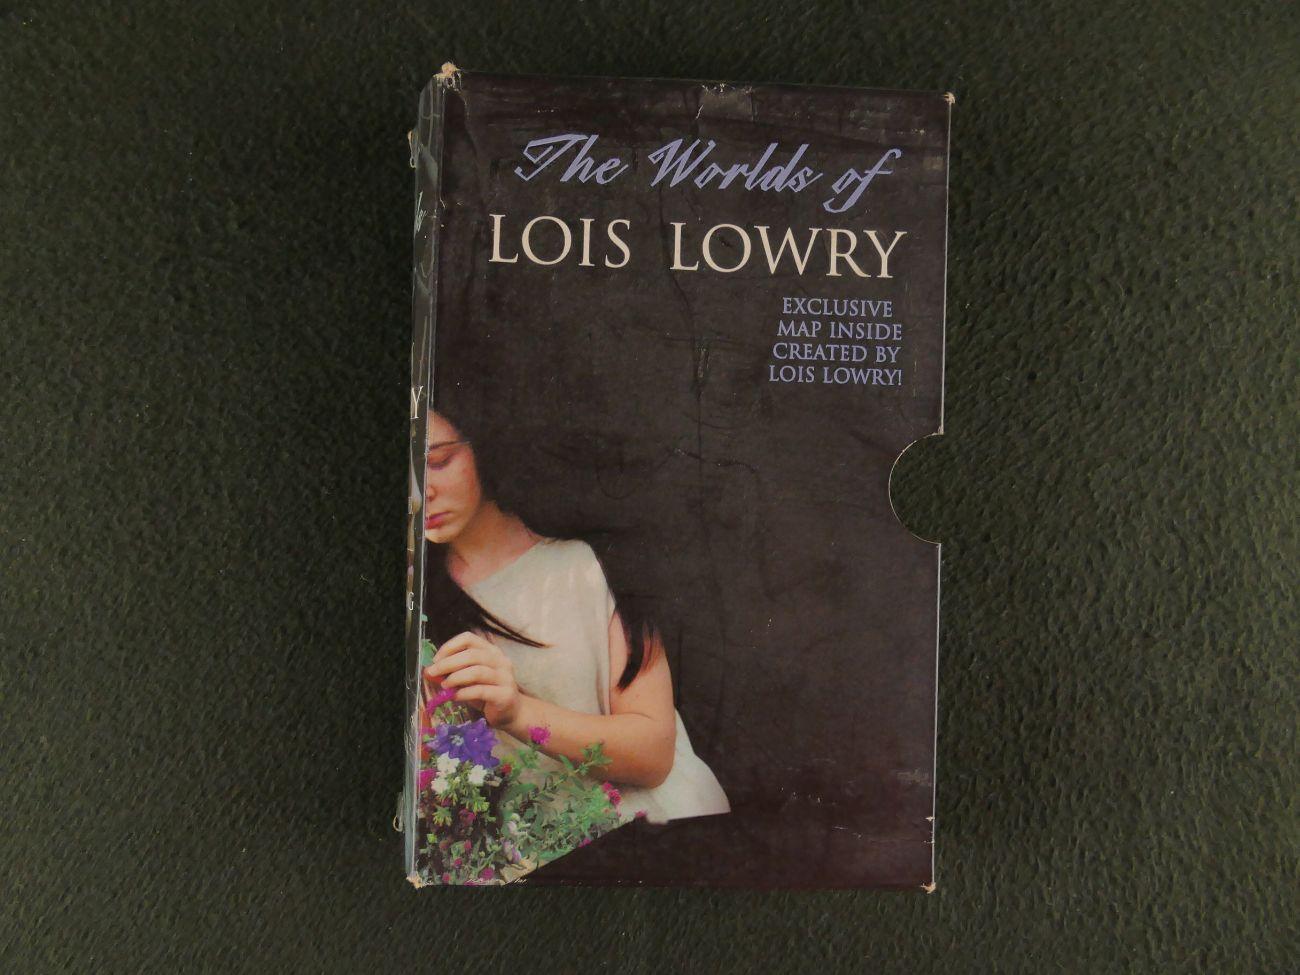 Lowry, Lois - The worlds of Lois Lowry  ( 6 foto's)